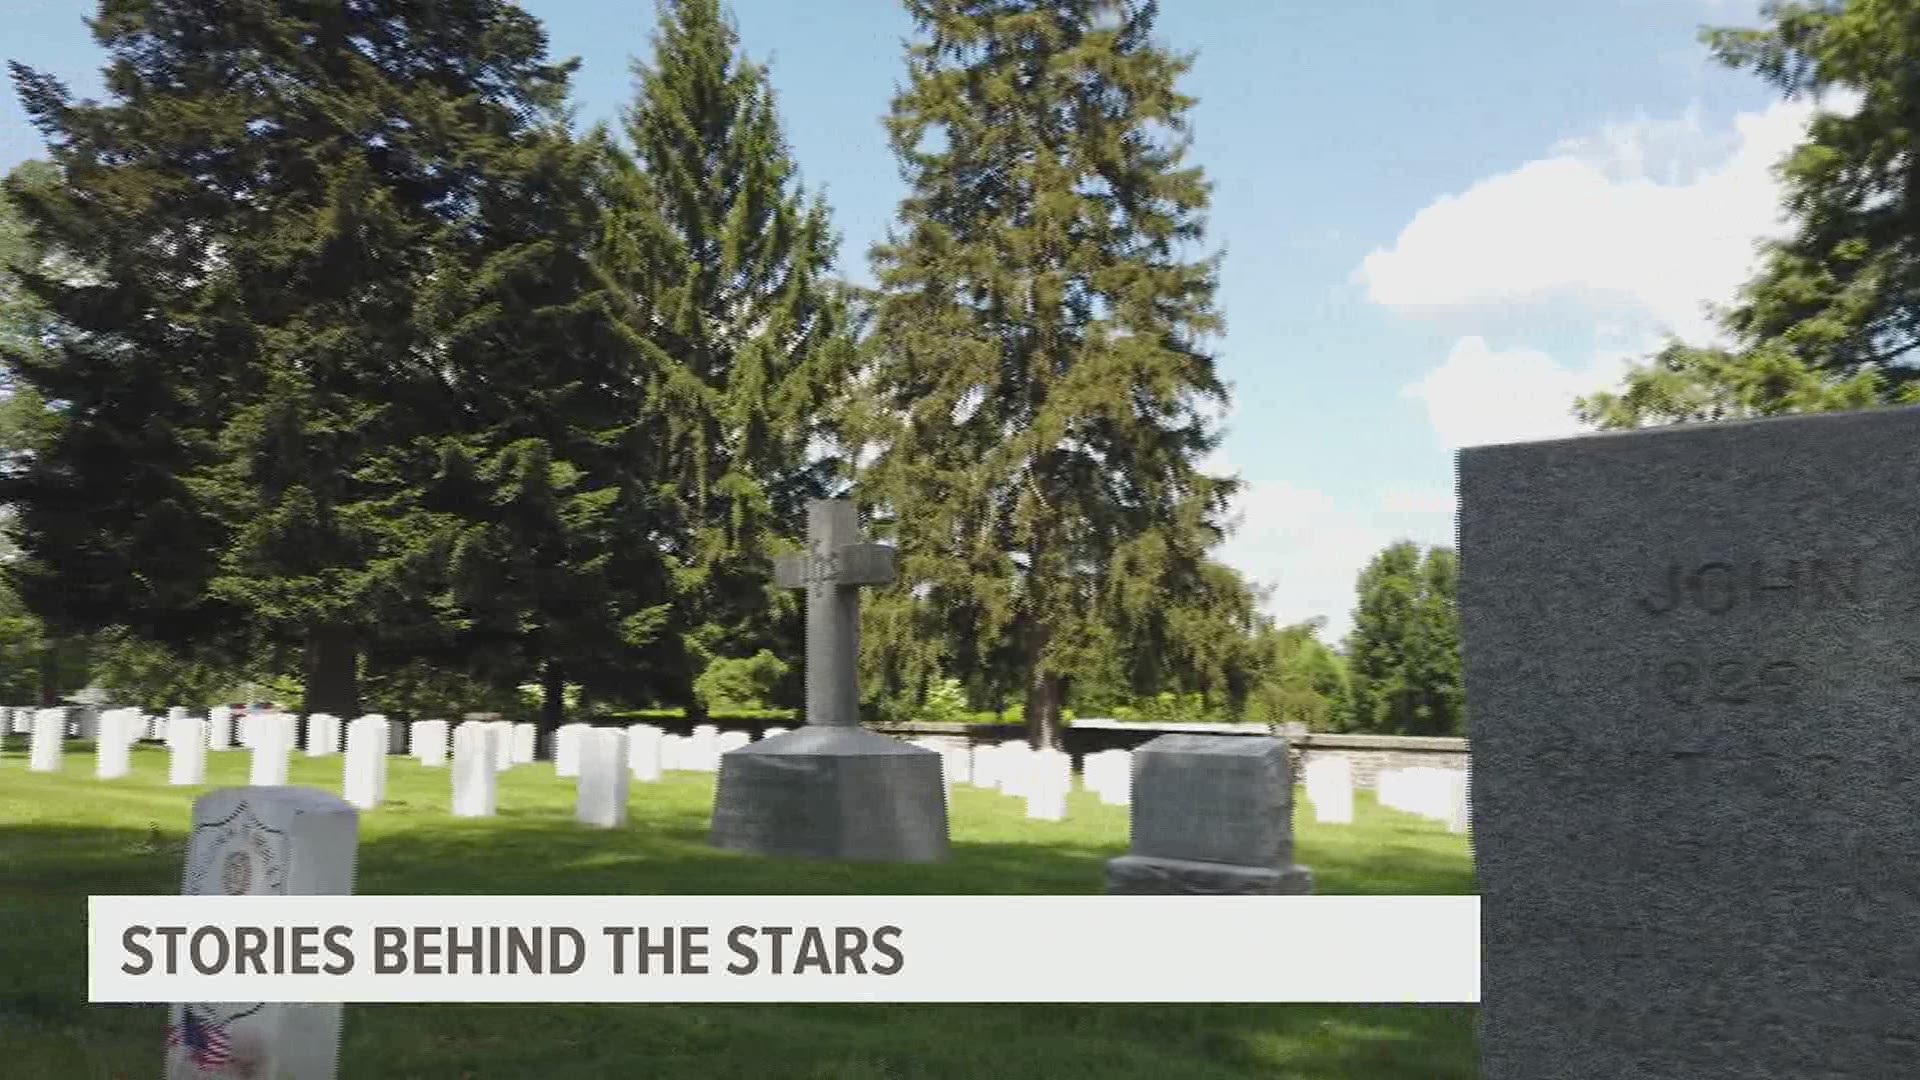 Currently, Don Milne is focusing on the soldiers killed on D-Day. 11 are buried at Gettysburg National Cemetery.